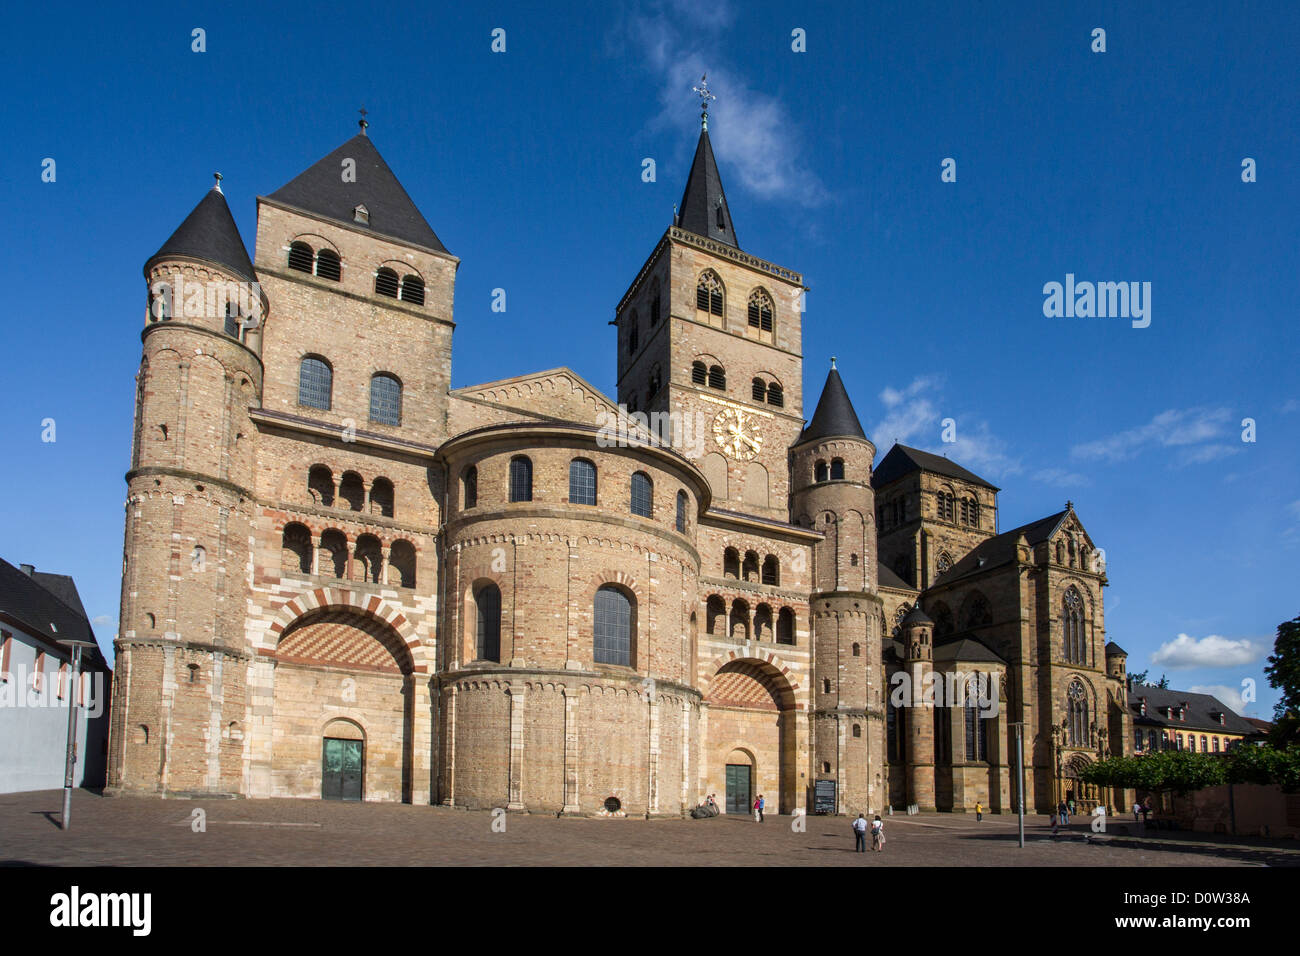 Germany, Europe, travel, Trier, Dome, Cathedral, architecture, church, colourful, history, religion, roman, skyline, square, Une Stock Photo